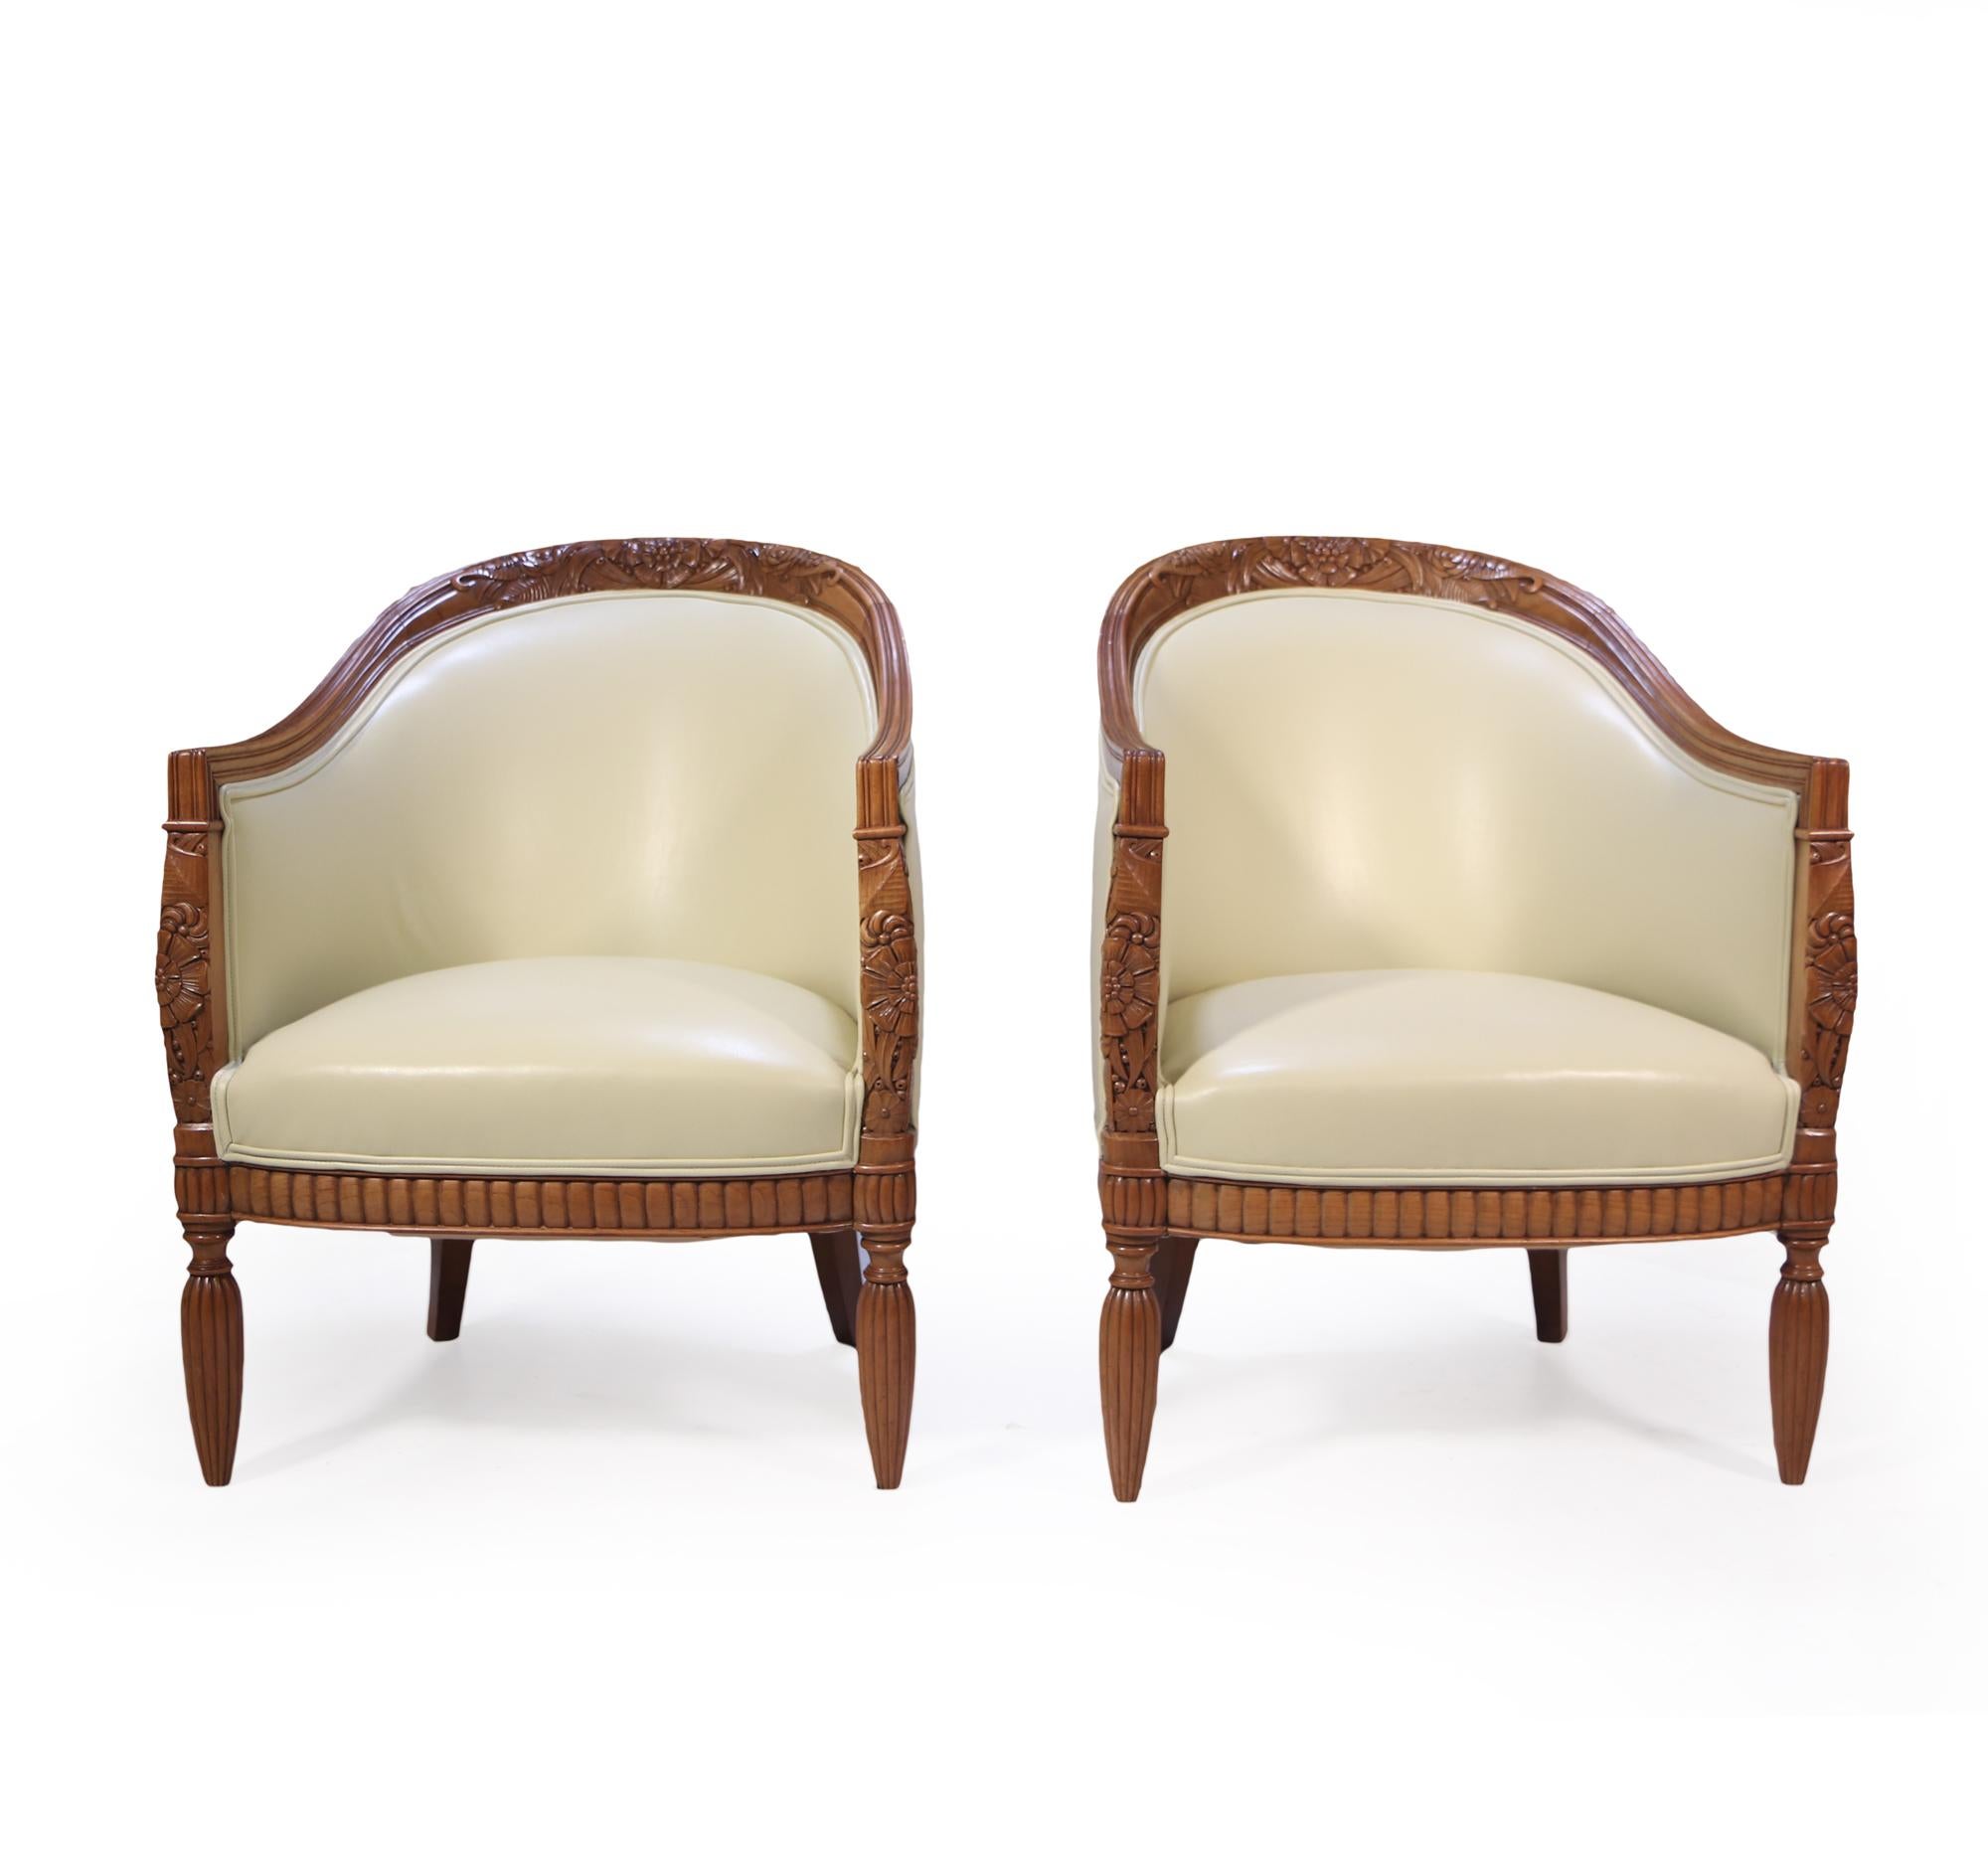 An exceptional pair of finely caved and sculpted armchairs, produced in France in the 1920’s the frames are solid pear, the chairs have been fully upholstered and covered in cream colour soft leather hyde.

Age: 1925

Style: Art